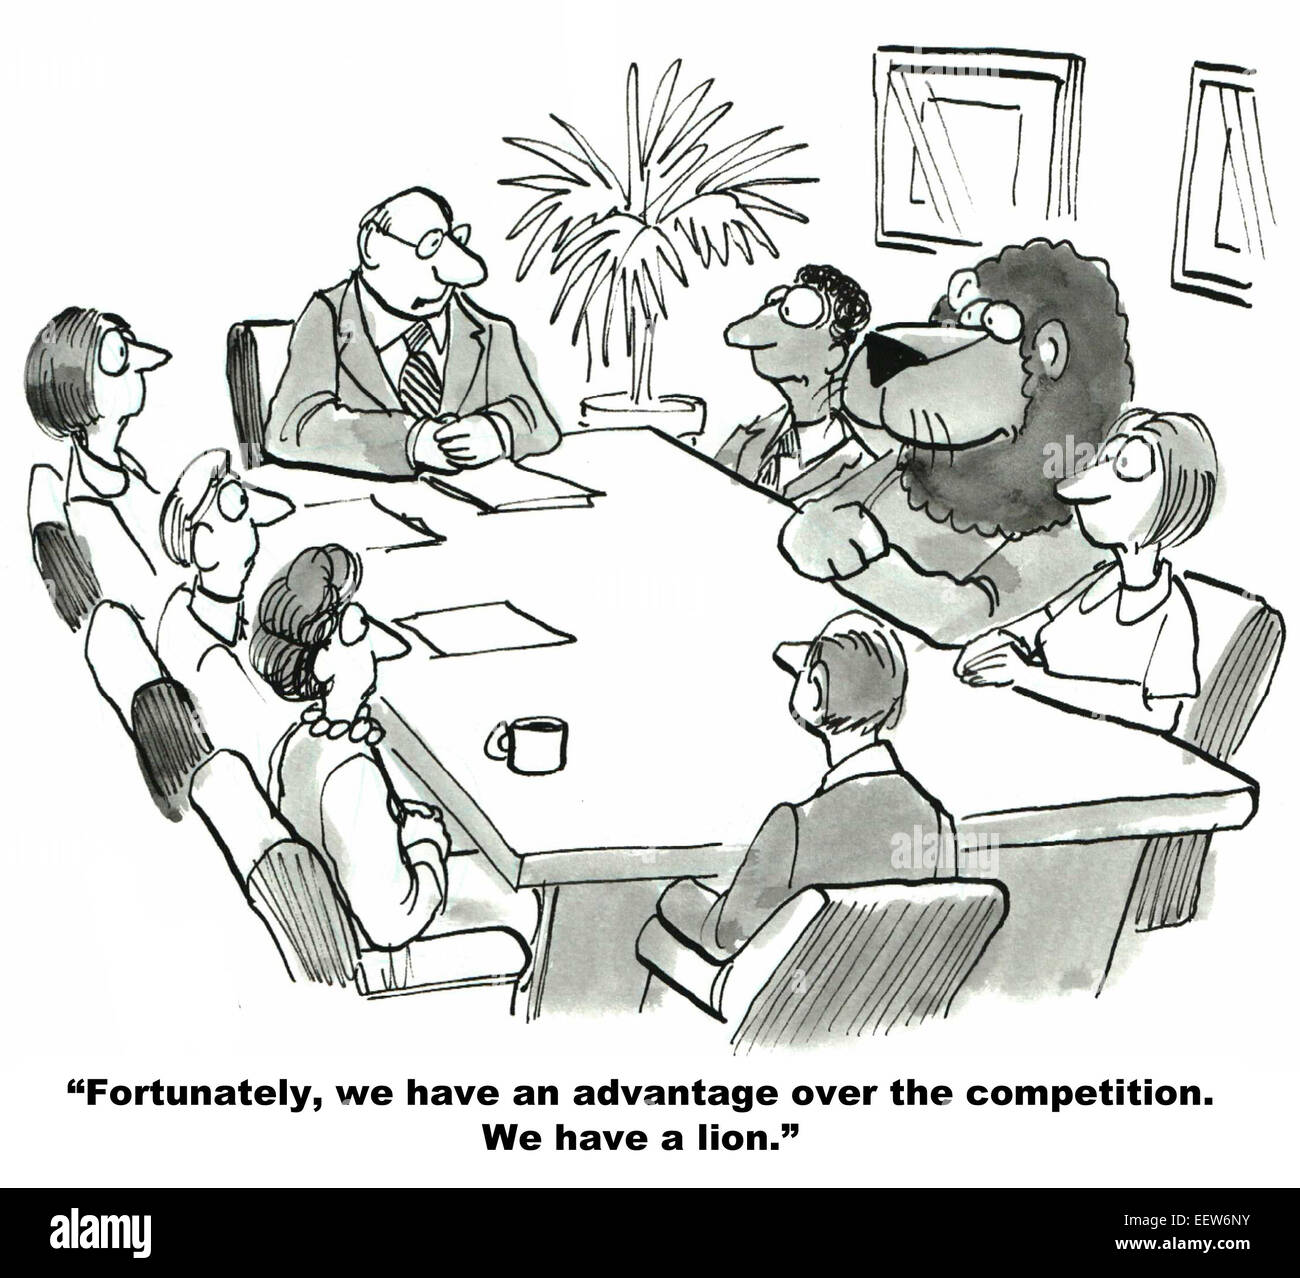 Cartoon Of A Business Meeting And The Leader Is Saying They Have A